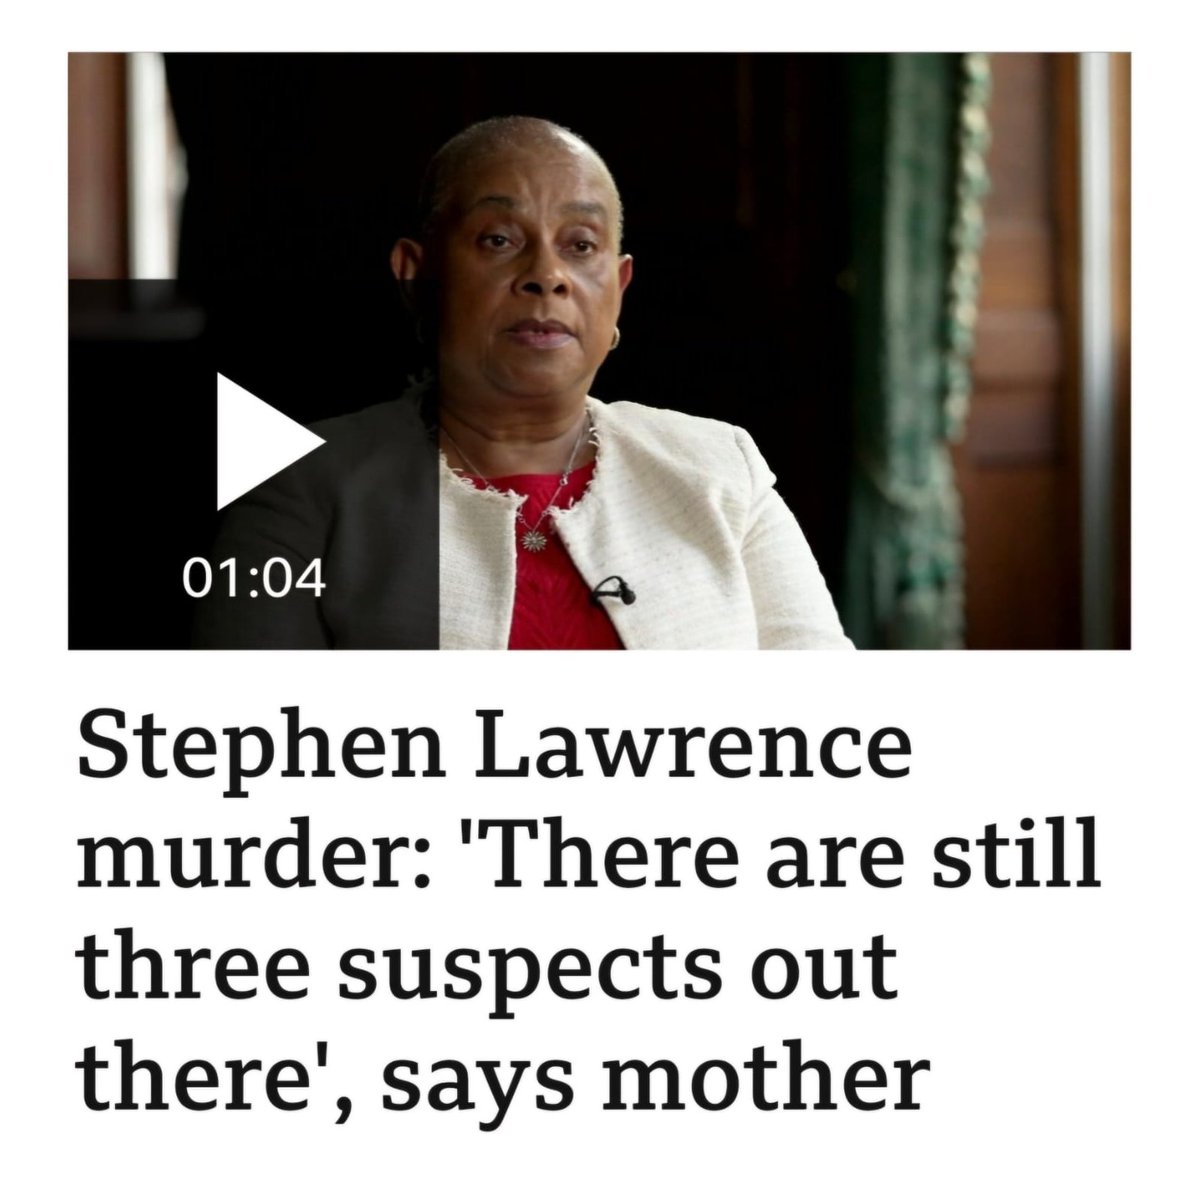 Met Police broke promise to answer questions raised about Stephen Lawrence killing.

The investigation should be reopened. Solidarity with Doreen and Neville Lawrence. 

#StephenLawrence #StephenLawrenceDay